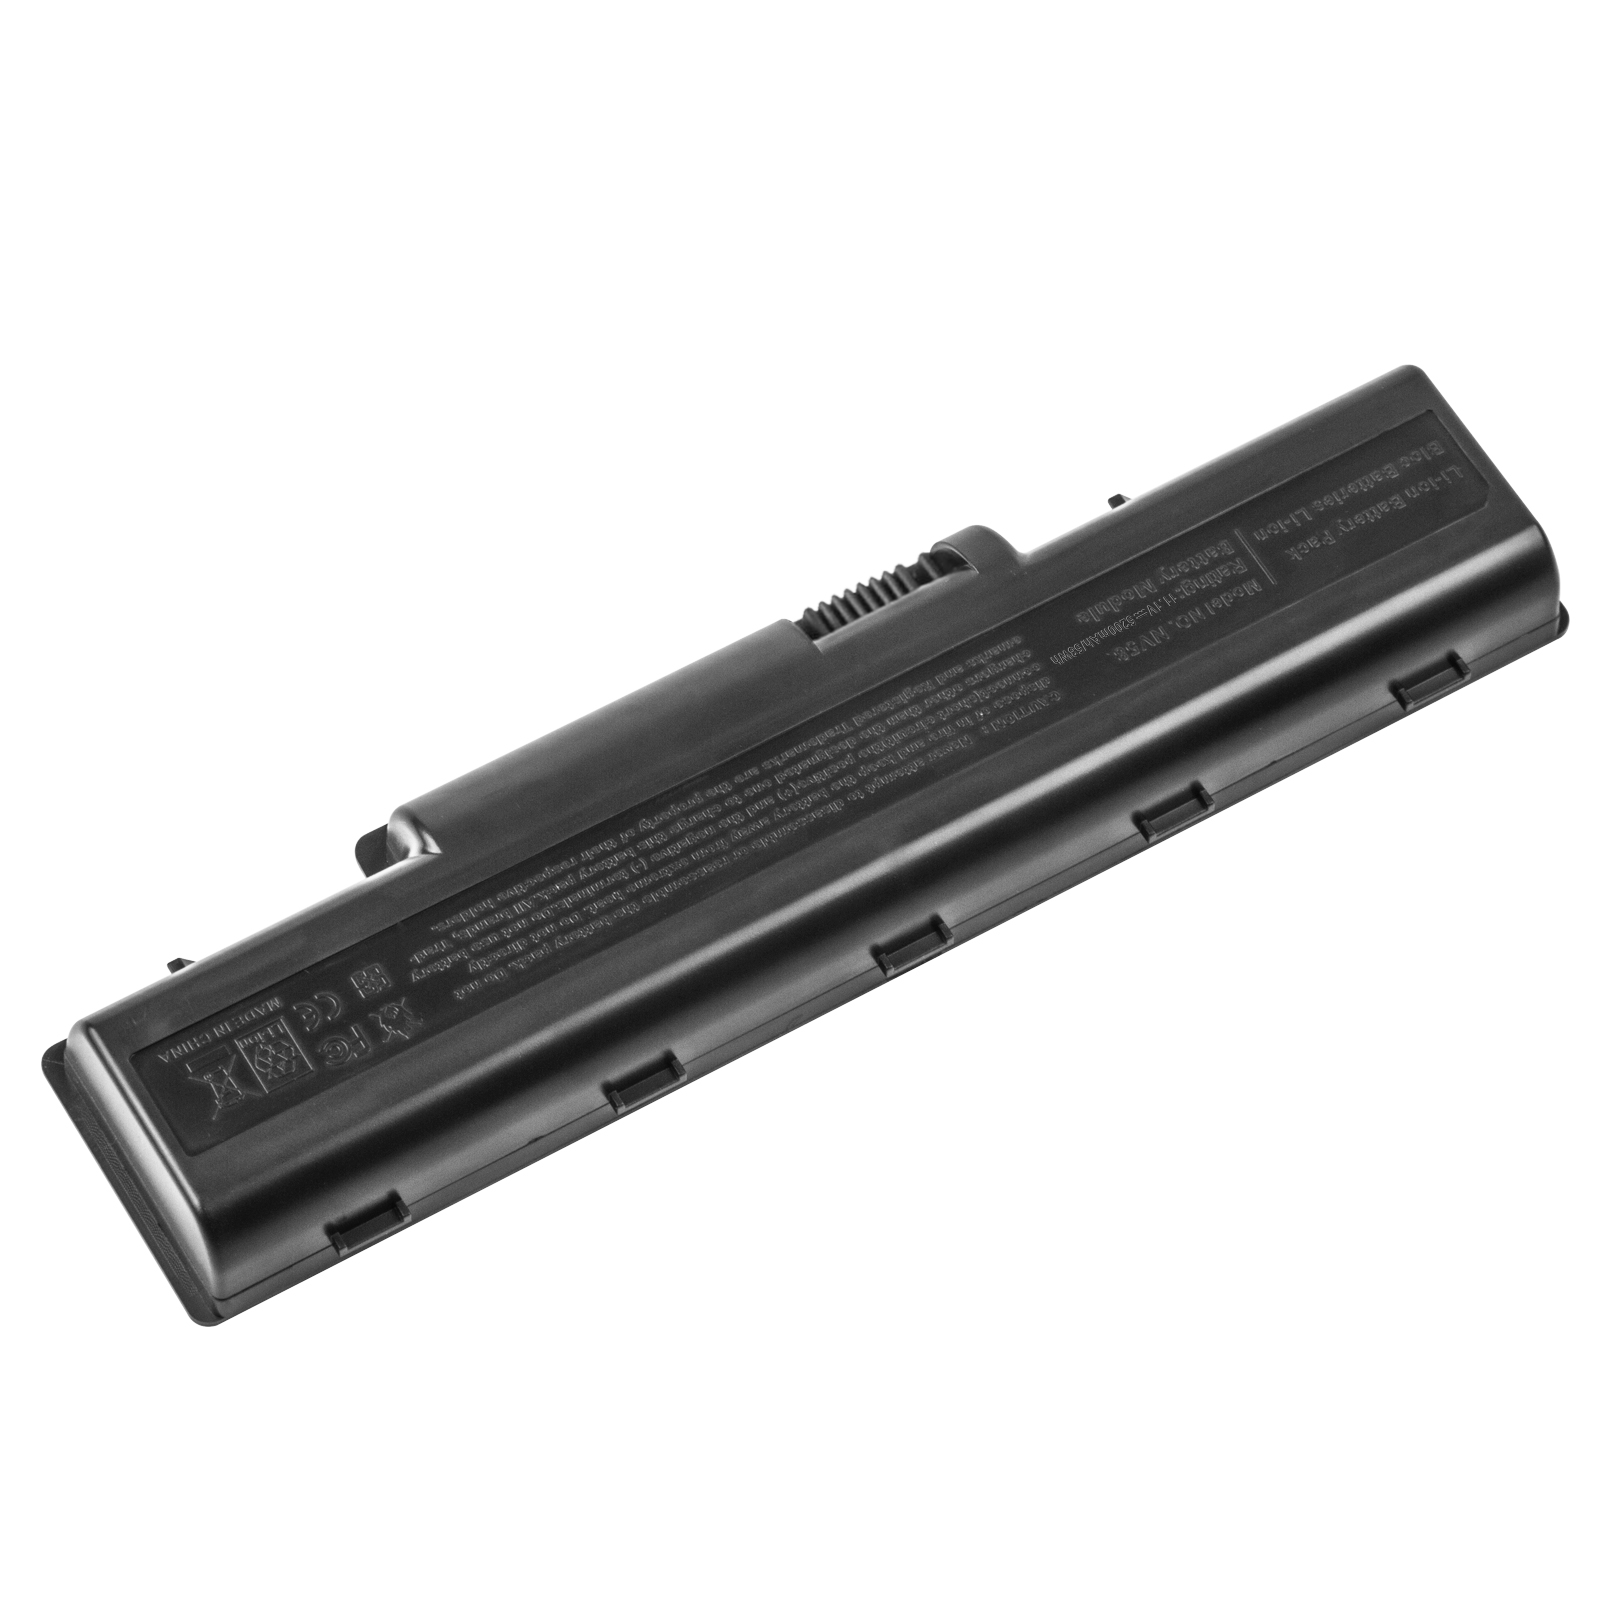 6 Cell Battery for Acer Aspire 5516 5517 5532 5334 5732z AS09A31 AS09A41 AS09A61 - image 2 of 4